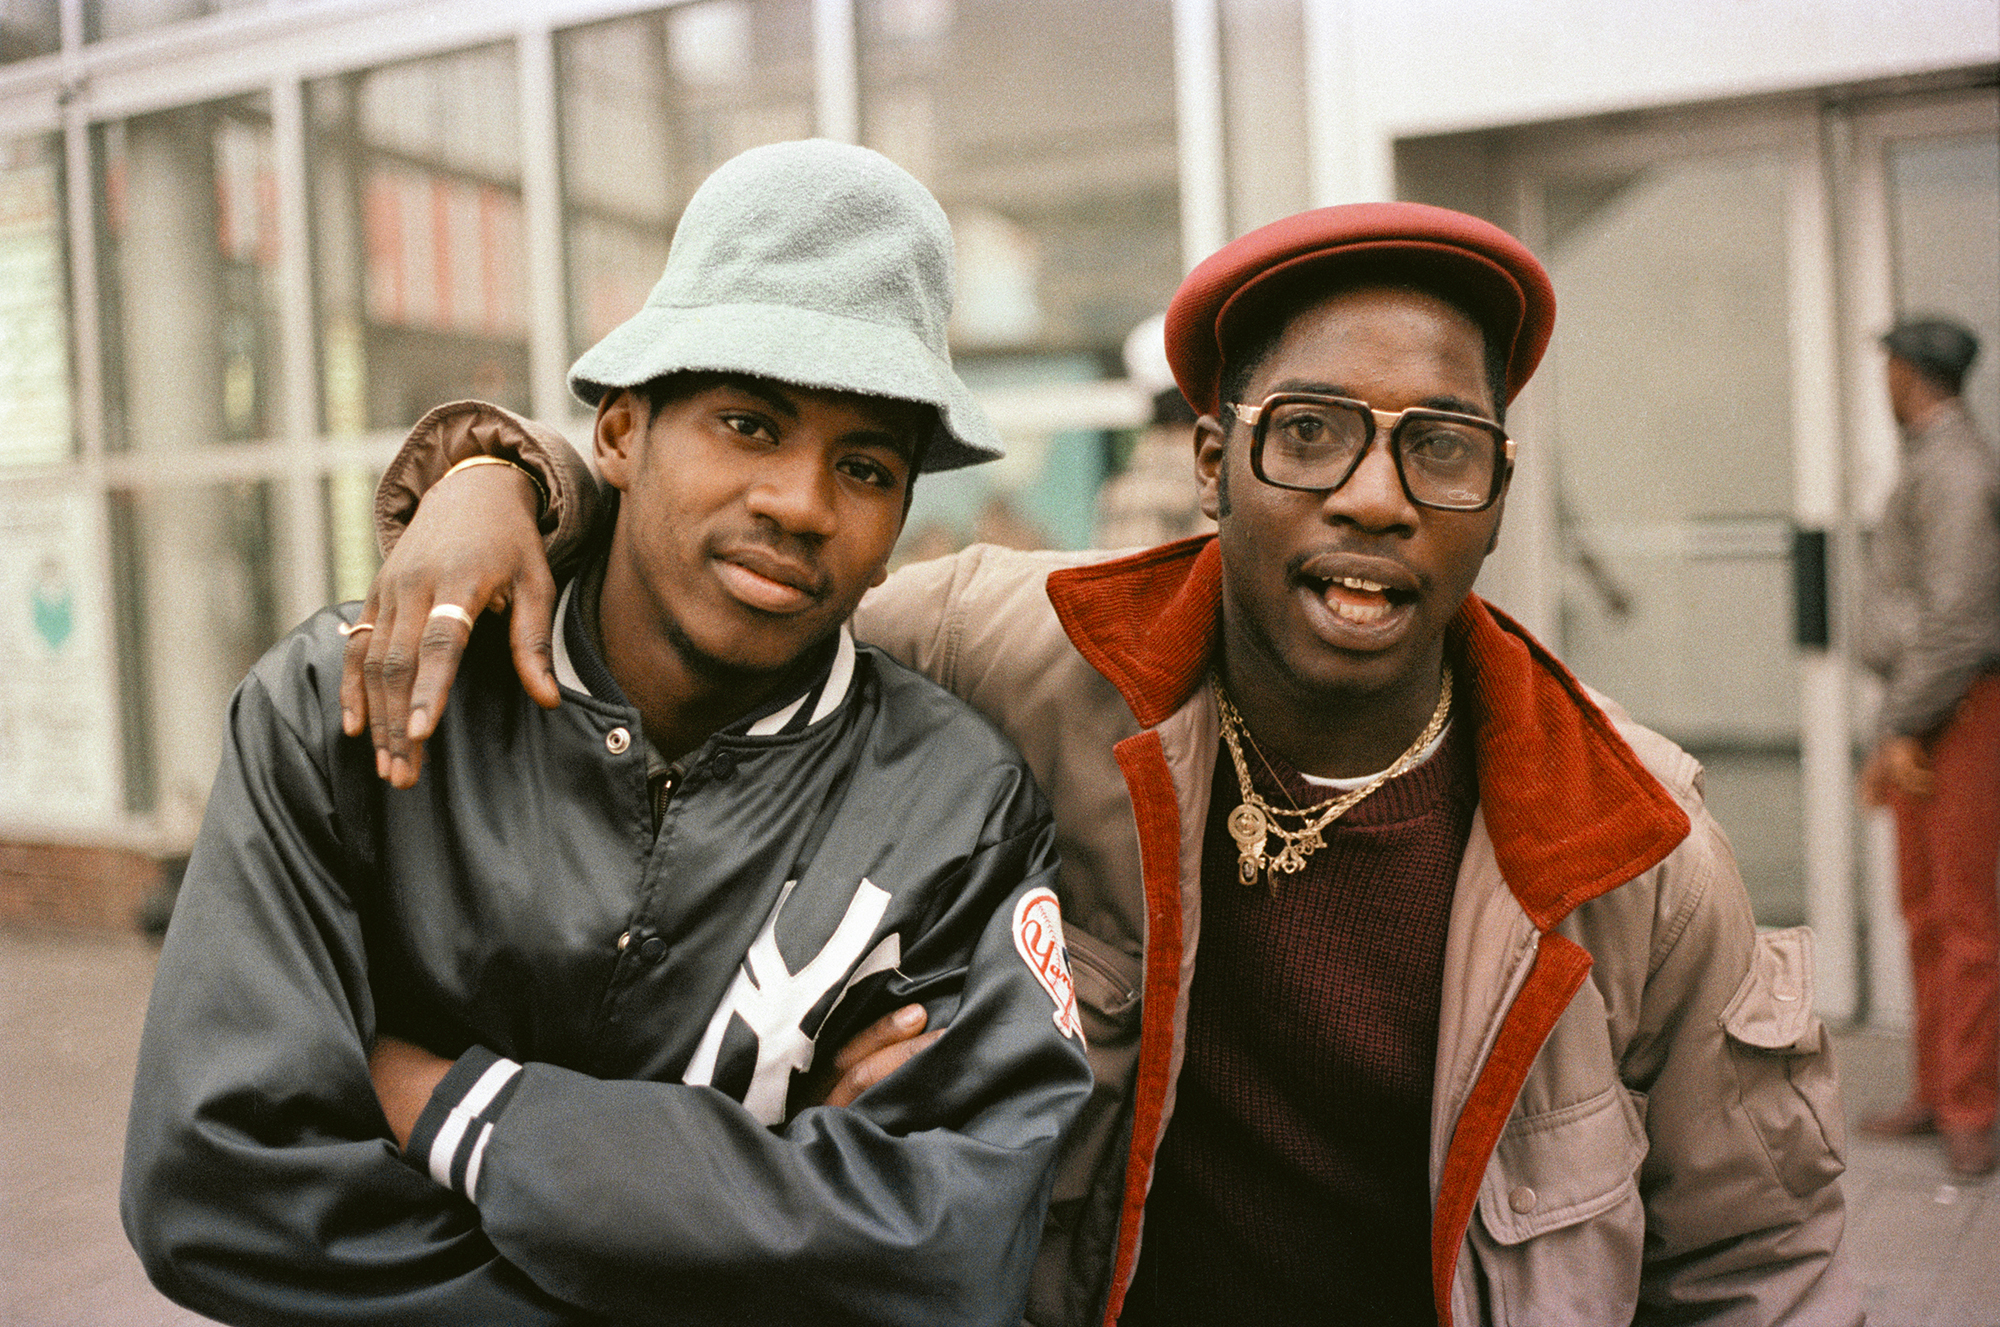 When hip-hop took hold of men’s fashion